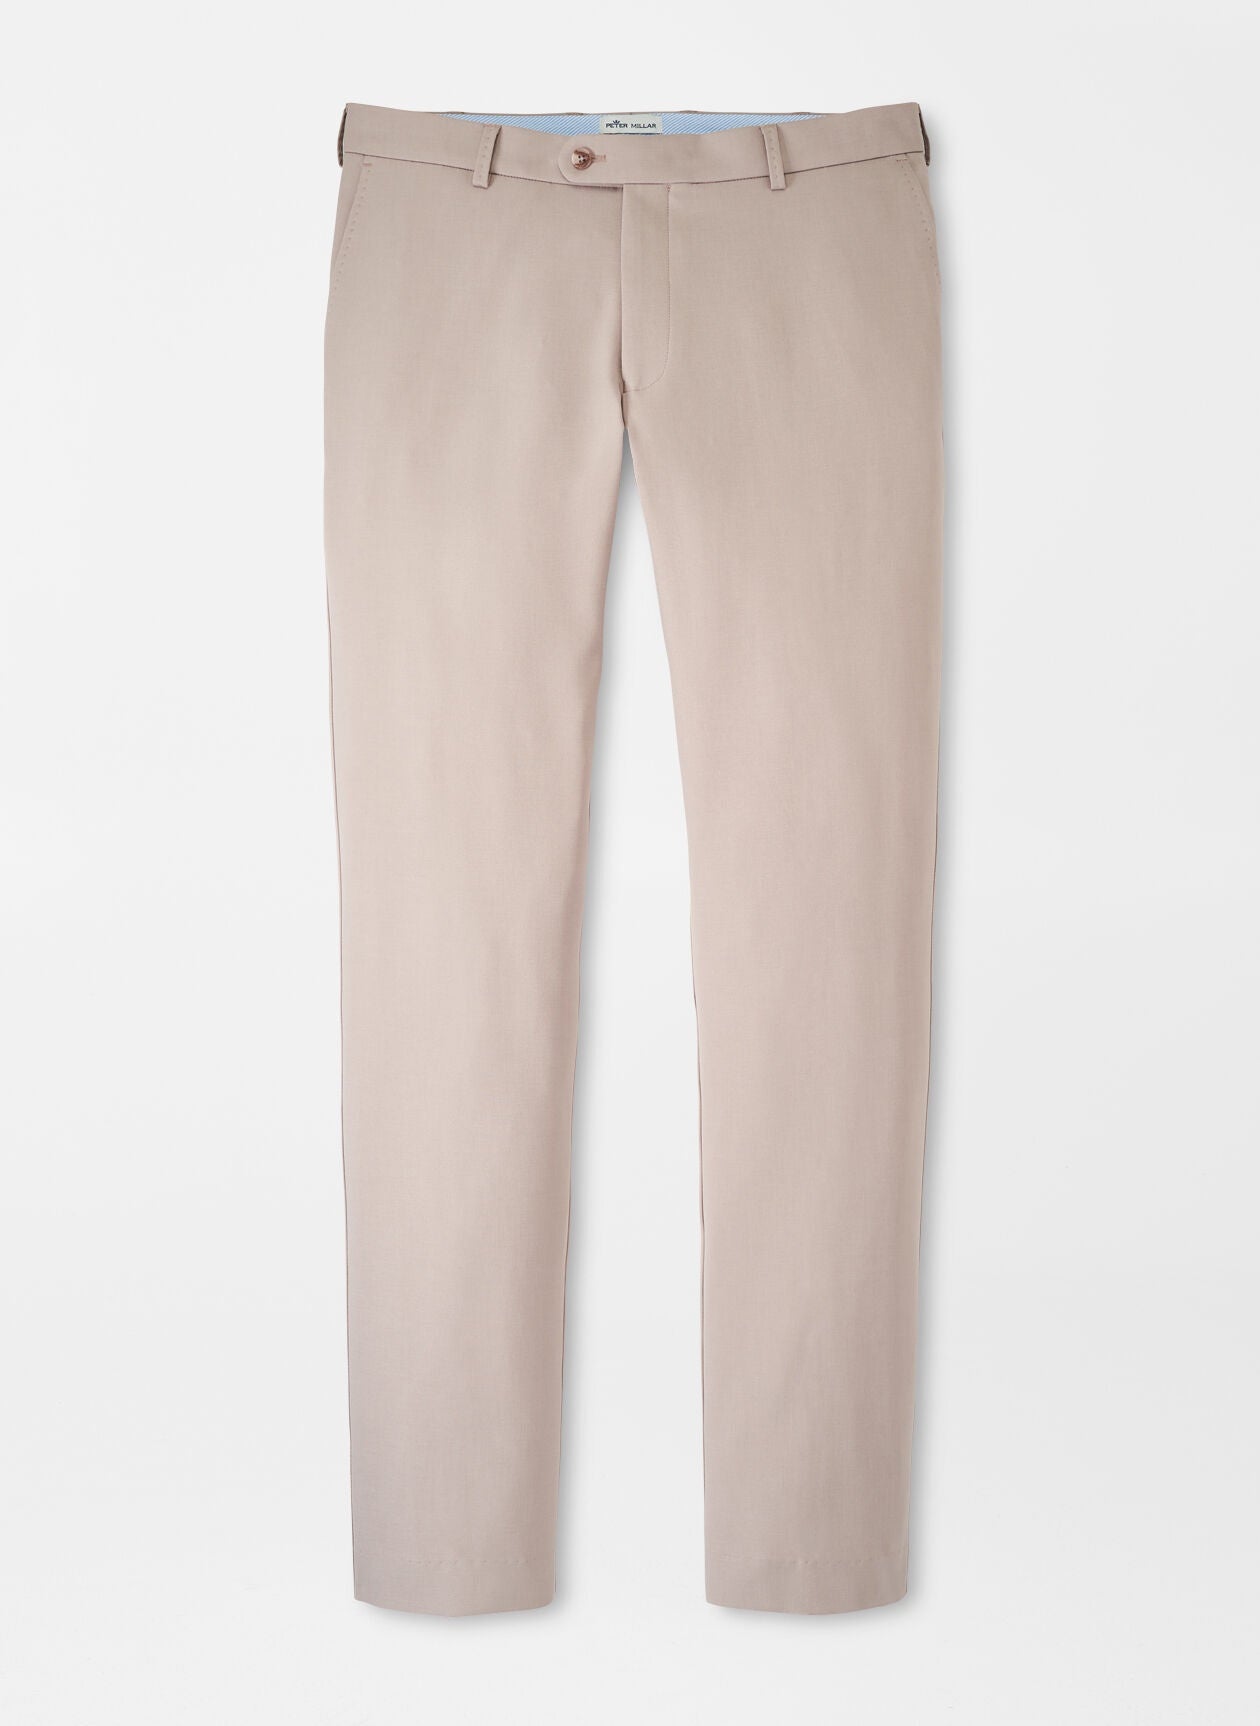 Peter Millar Franklin Performance Trouser in Toasted Almond